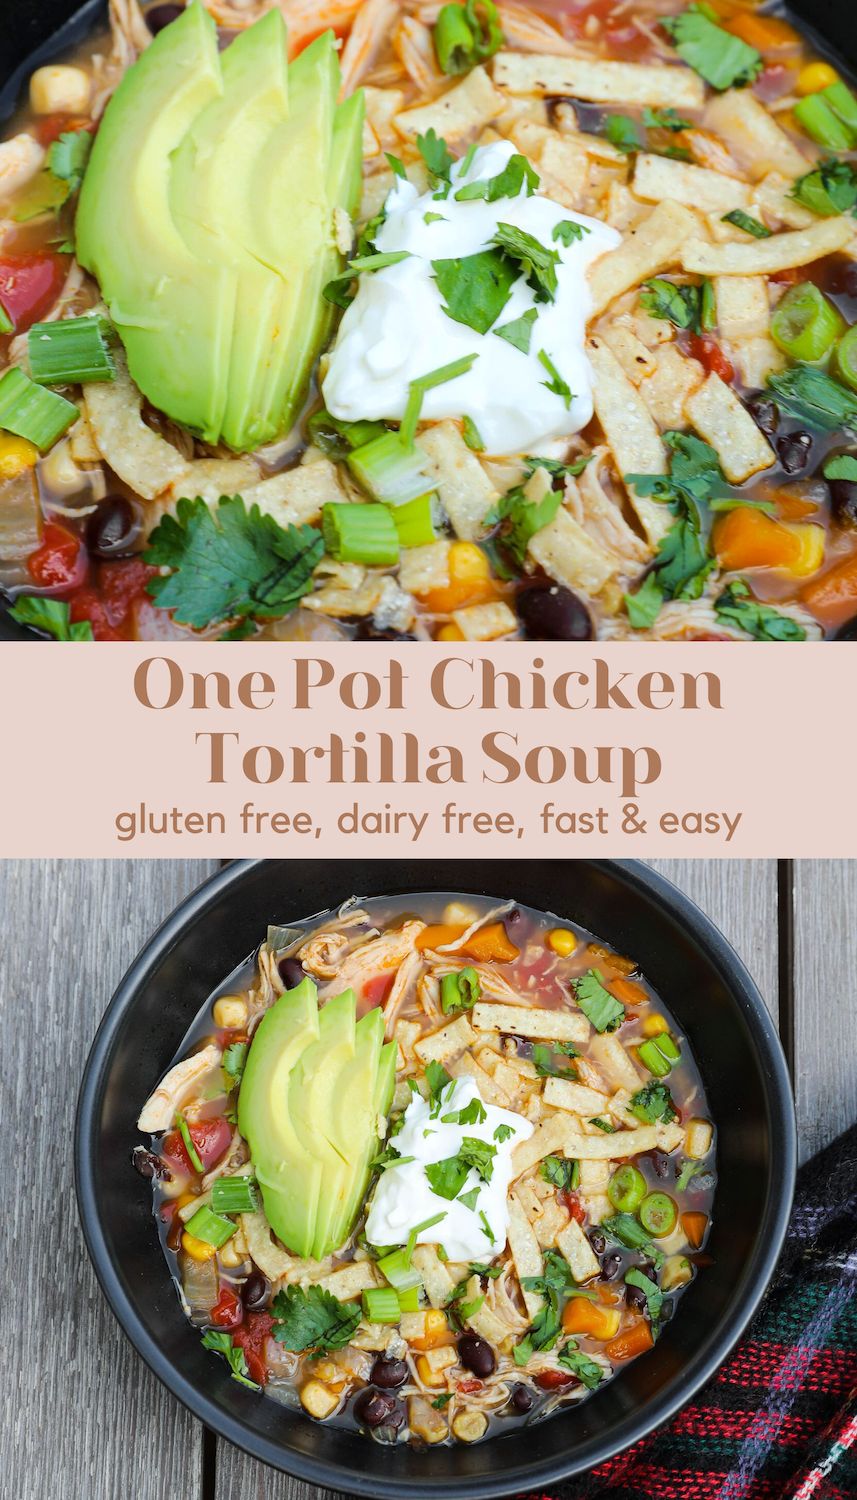 Chicken Tortilla Soup One Pot Gluten free dairy free lauren emily lindmark daily dose of charm 4